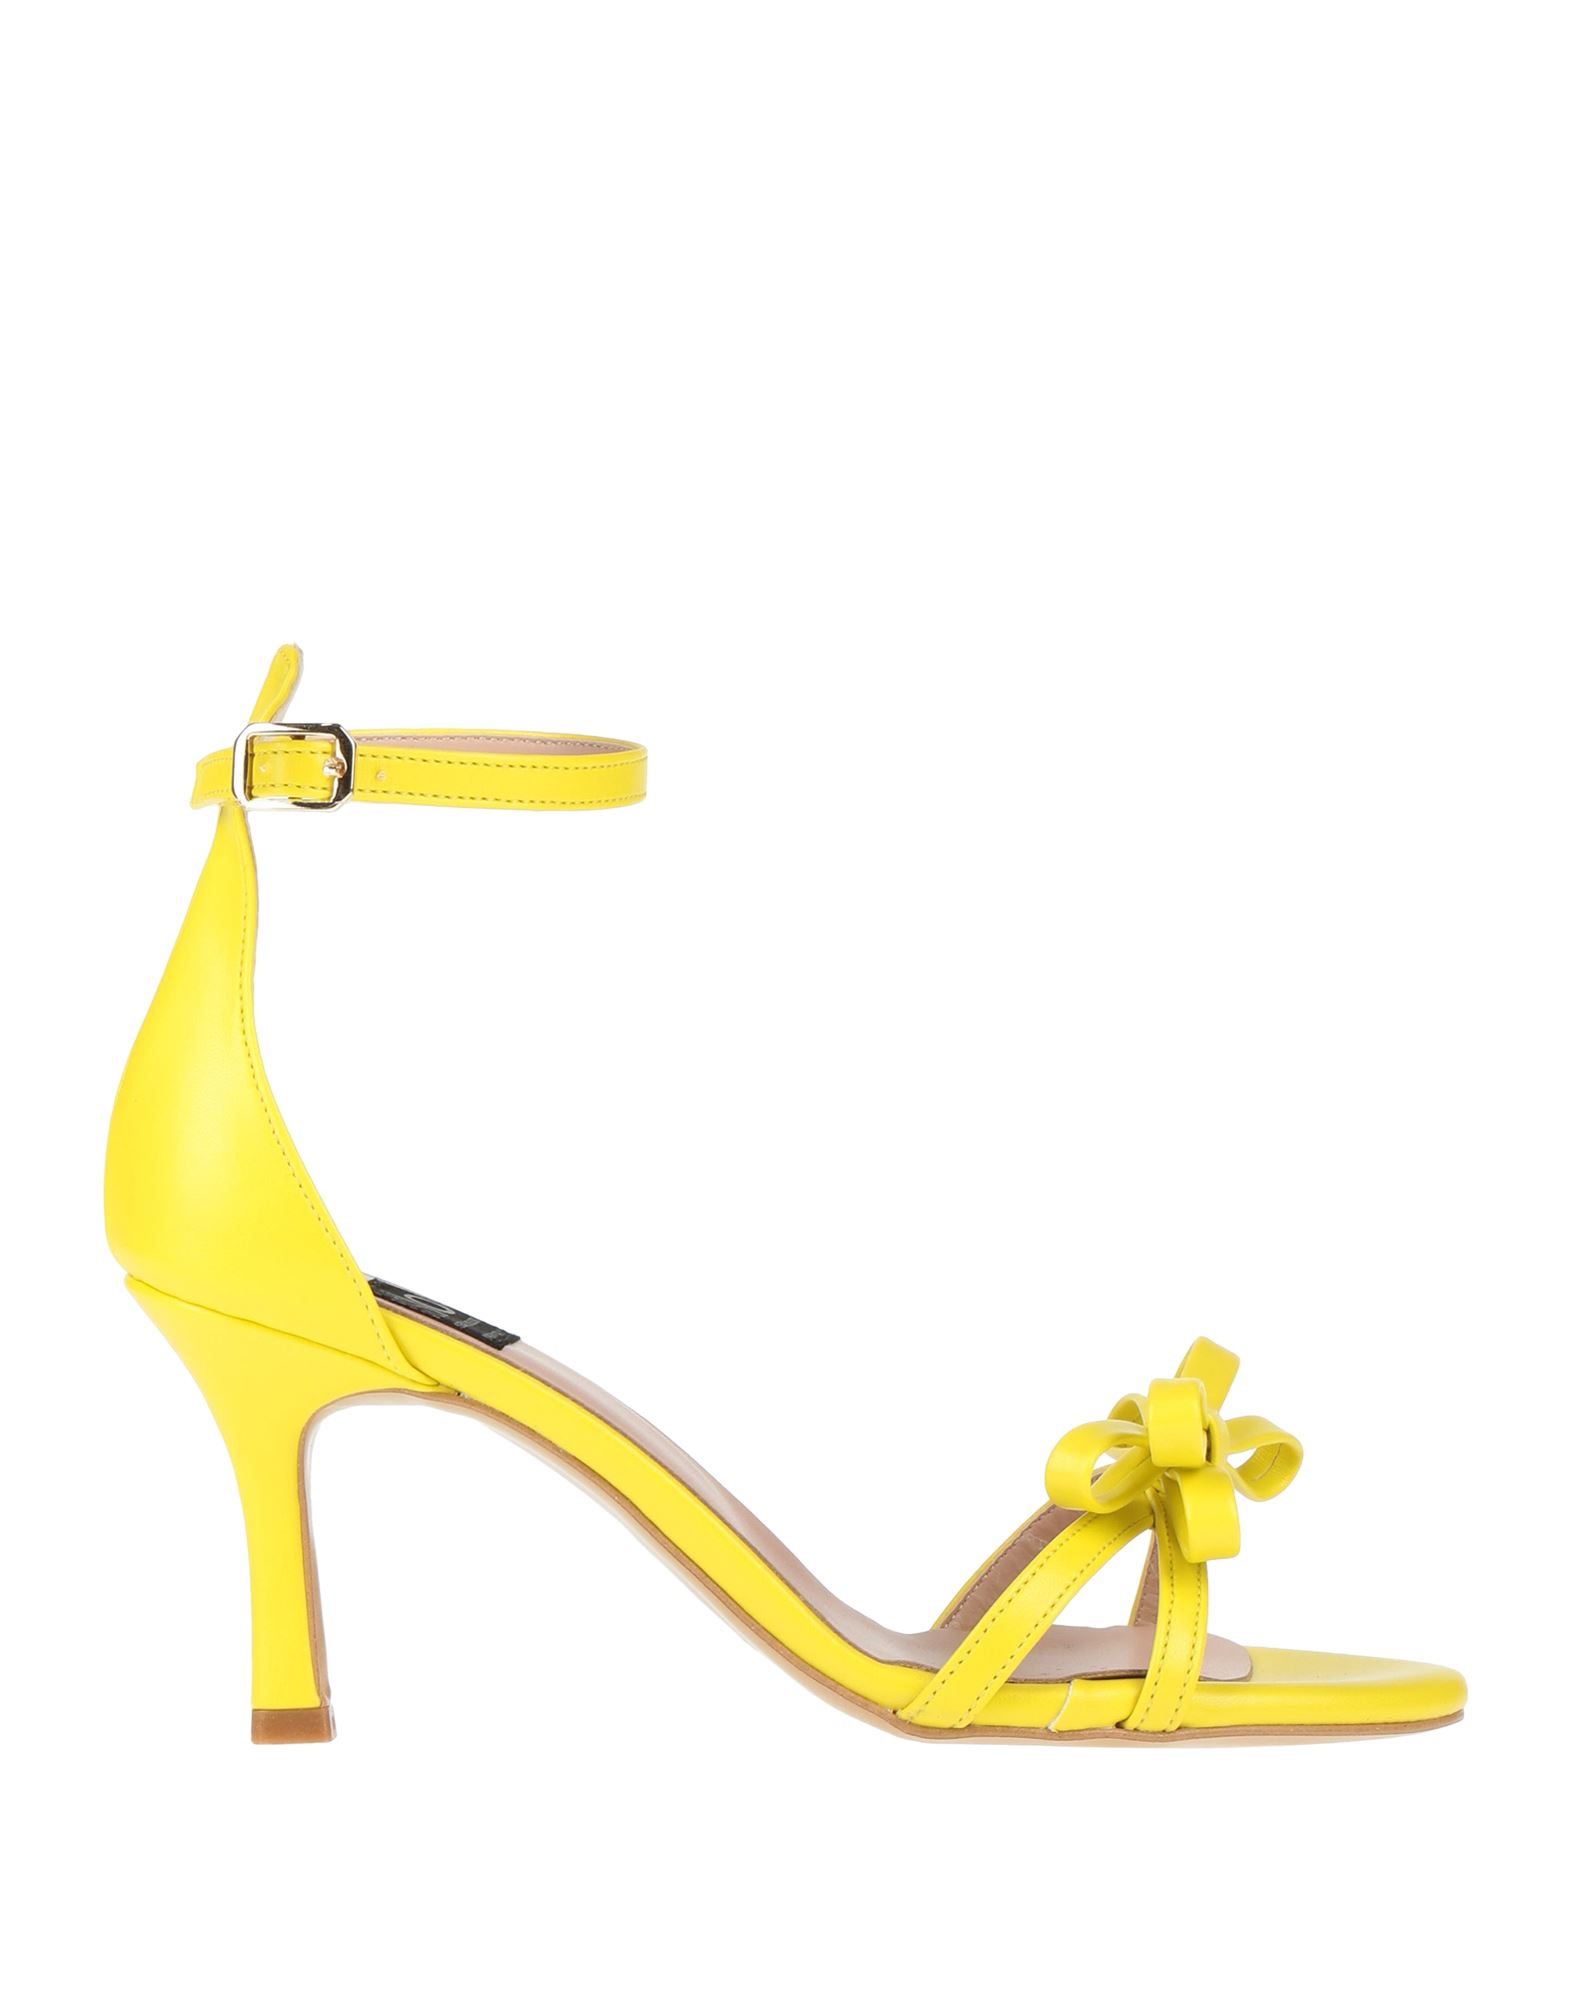 Islo Isabella Lorusso Sandals In Yellow